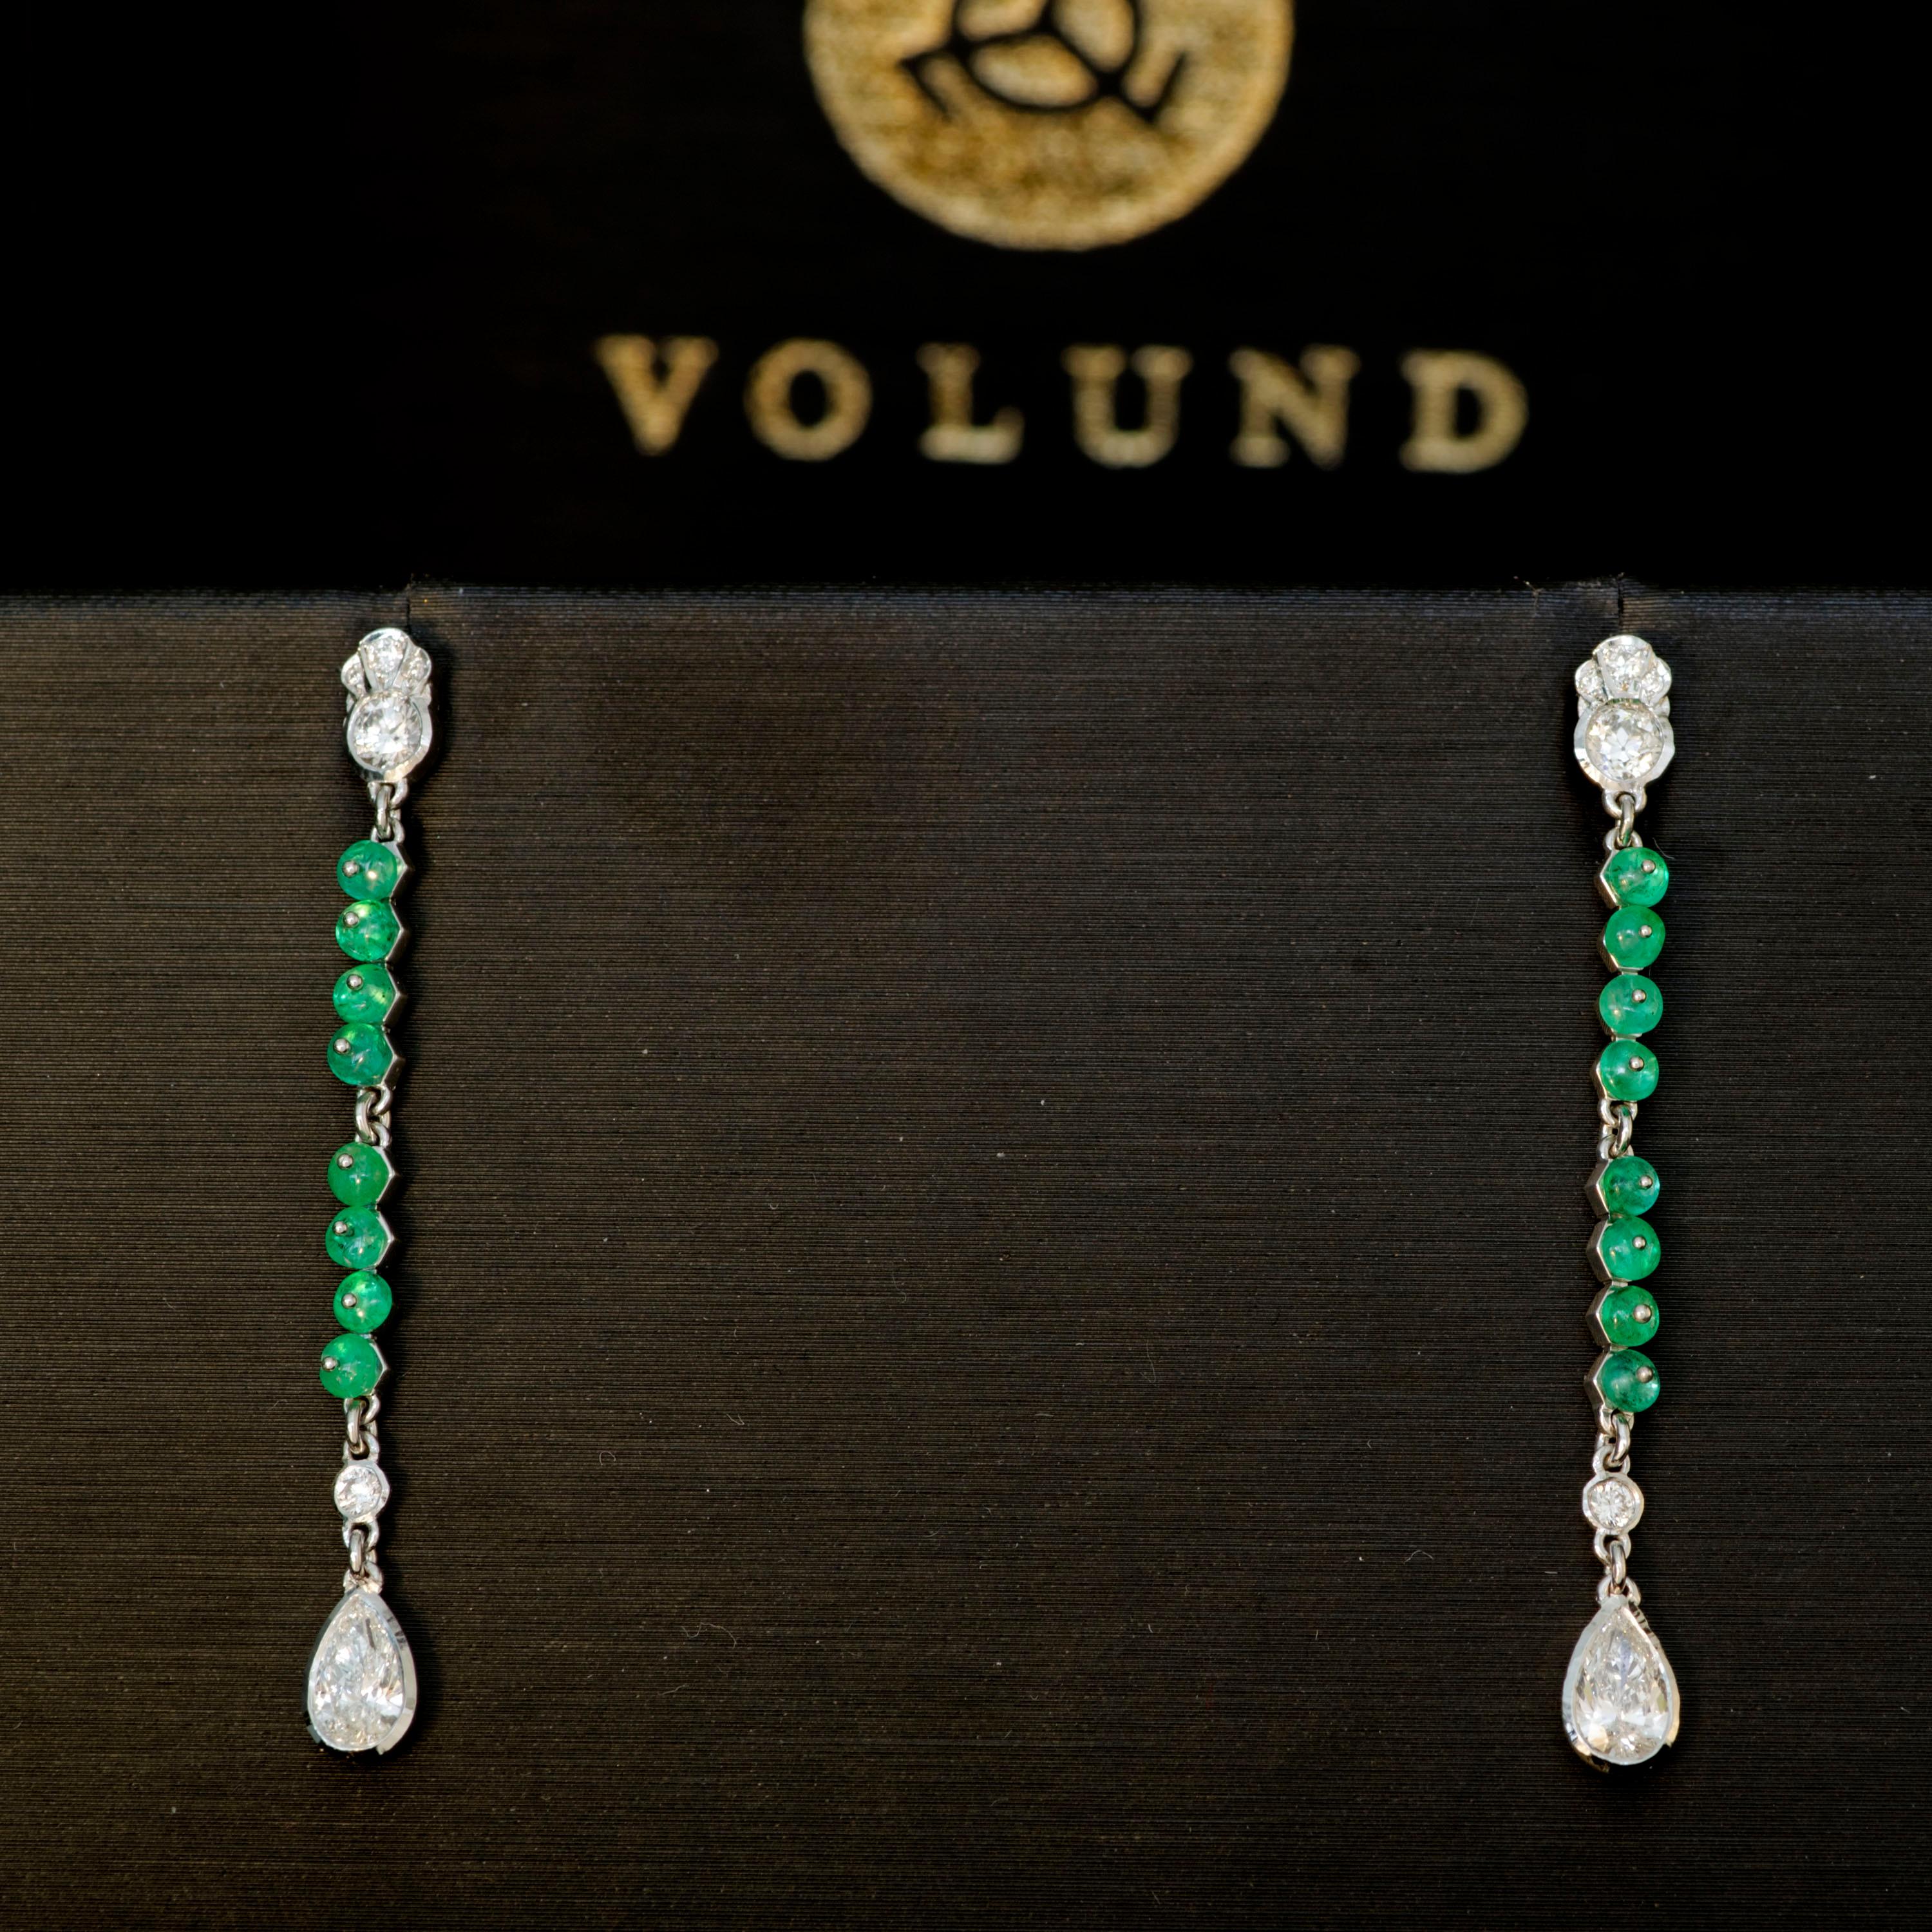 A delicate Art Deco Style suite of earrings and pendant in 18K white gold, emeralds (cabochon and beads) and diamonds. Refined creation by a high end designer.

Please note: this was a bespoke, unique creation. We can create another one for you